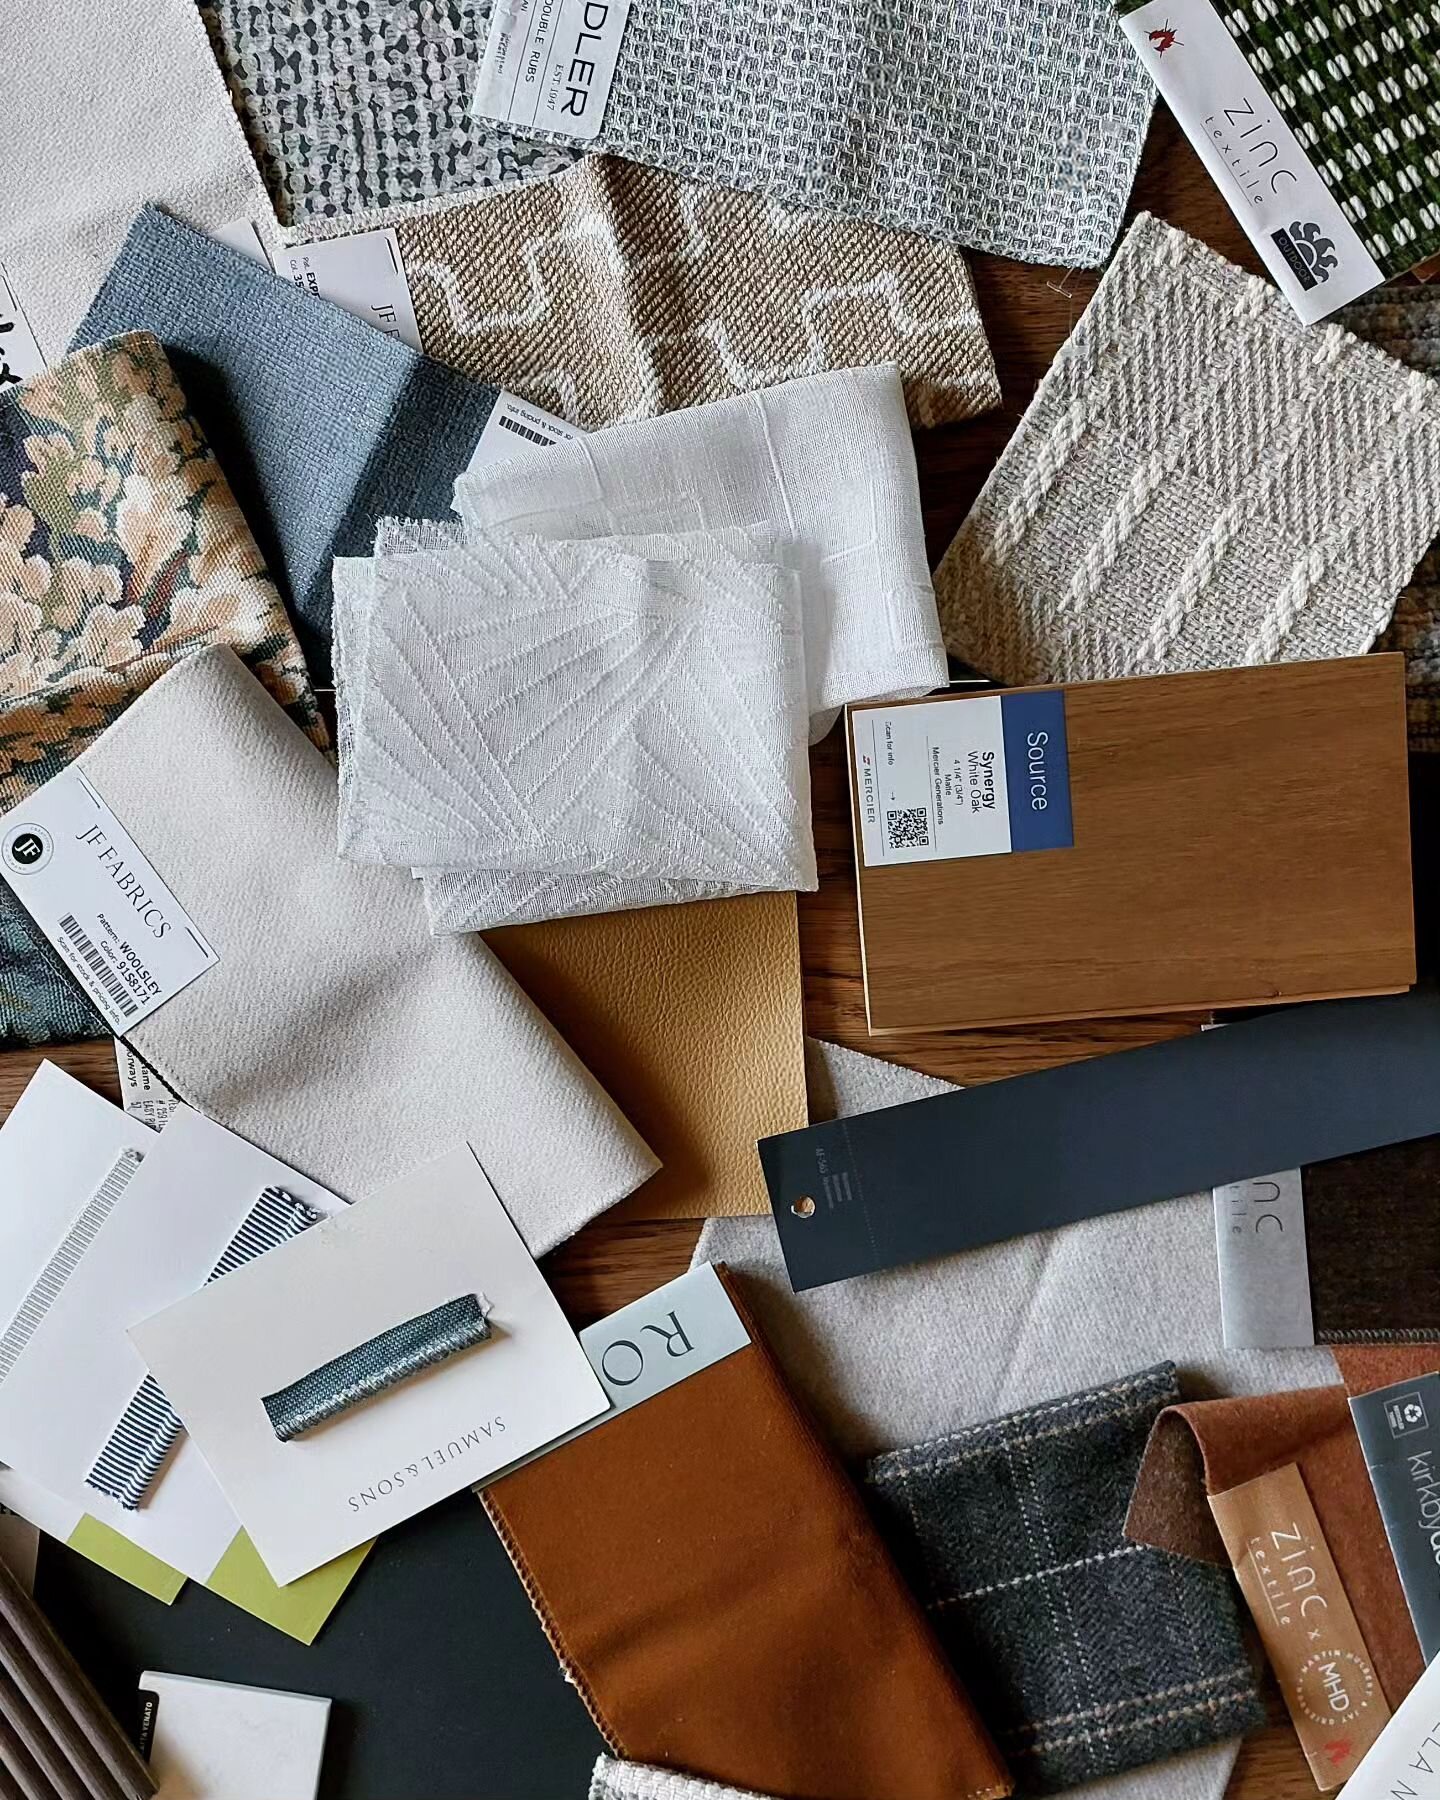 C R E A T I V I T Y
.
It's fun to make a mess ... especially when it's a creative mess of fabrics, finishes, and other fun shit. I think this is my favourite part (but I do say that about almost every part of what we do.)
.
#interiordesignstudio #cre